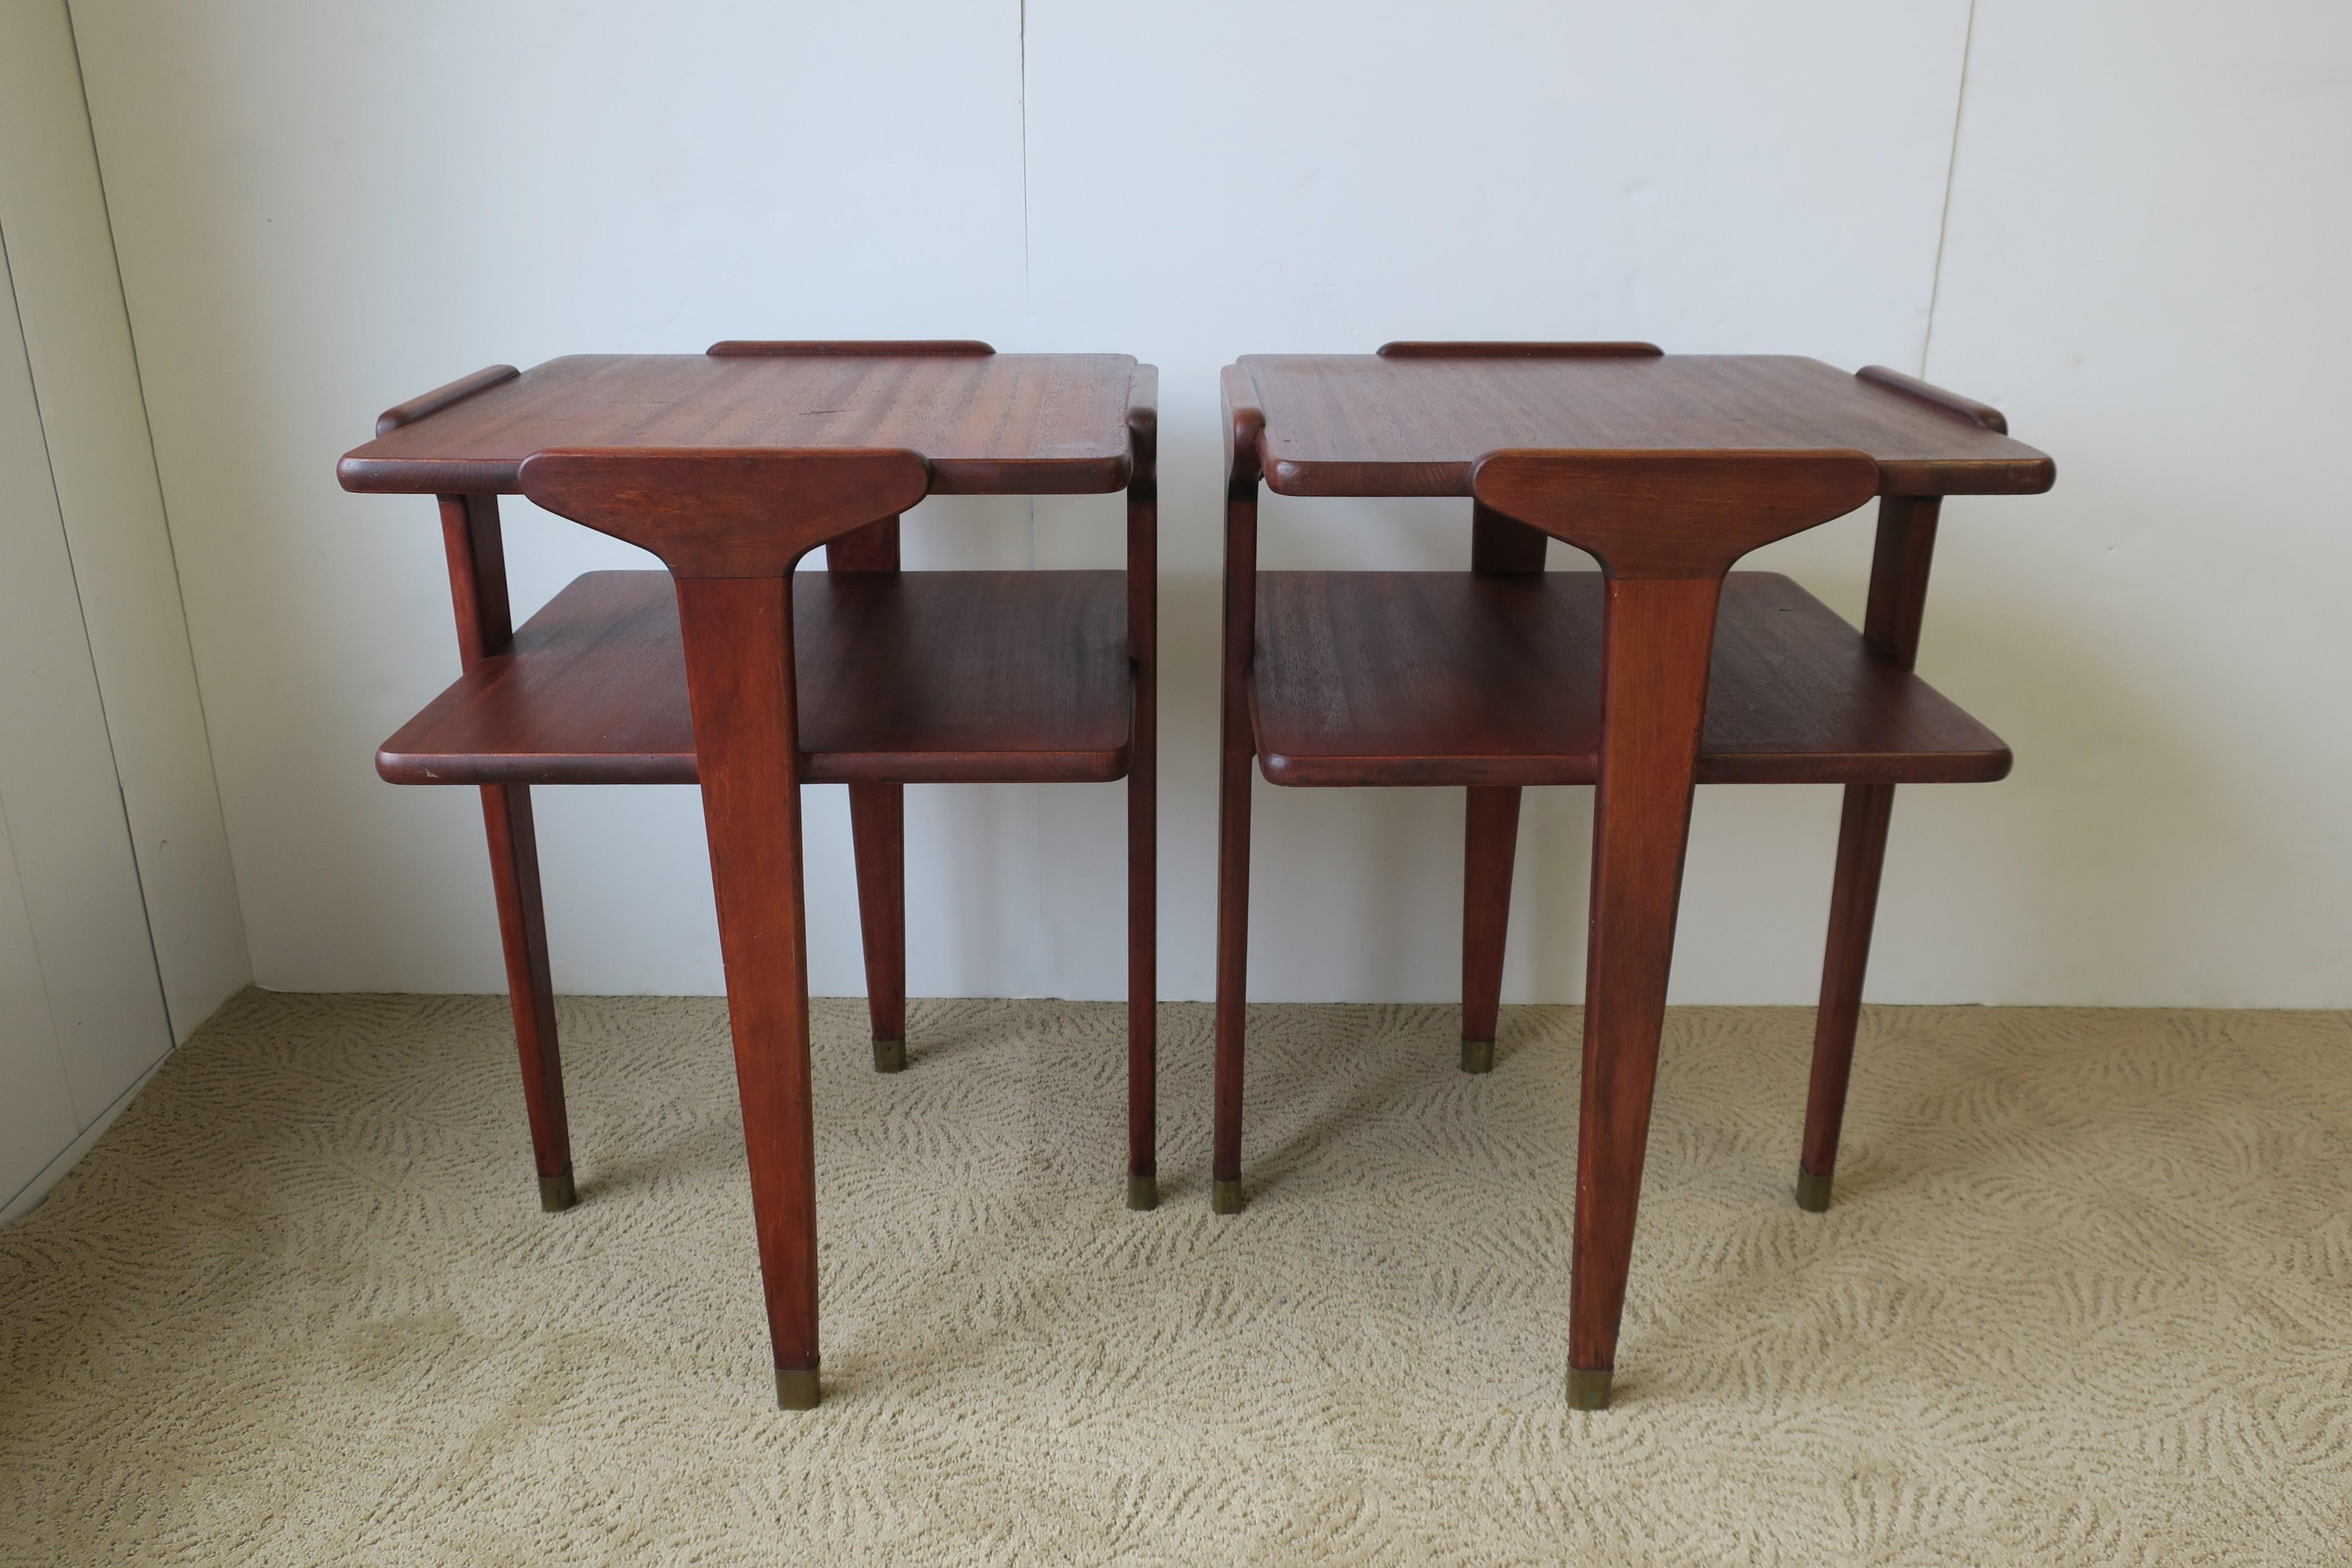 A beautiful and very well made pair of wood end tables or night stand [nightstand] tables, with shelf and sleek leg design from top to bottom, including brass accent at base. 

